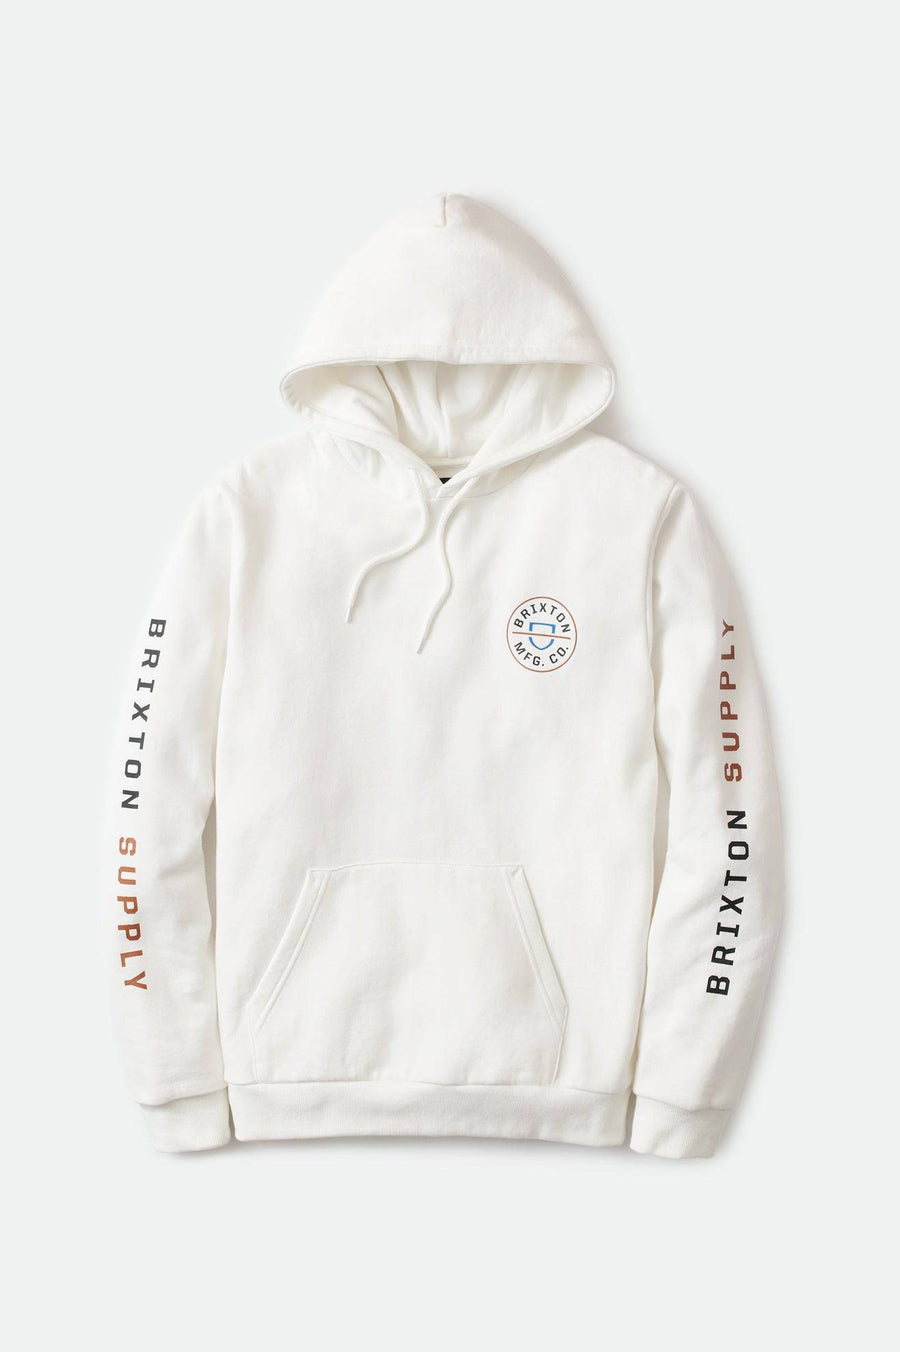 Brixton Crest Hoodie in Off White Carmel and Black